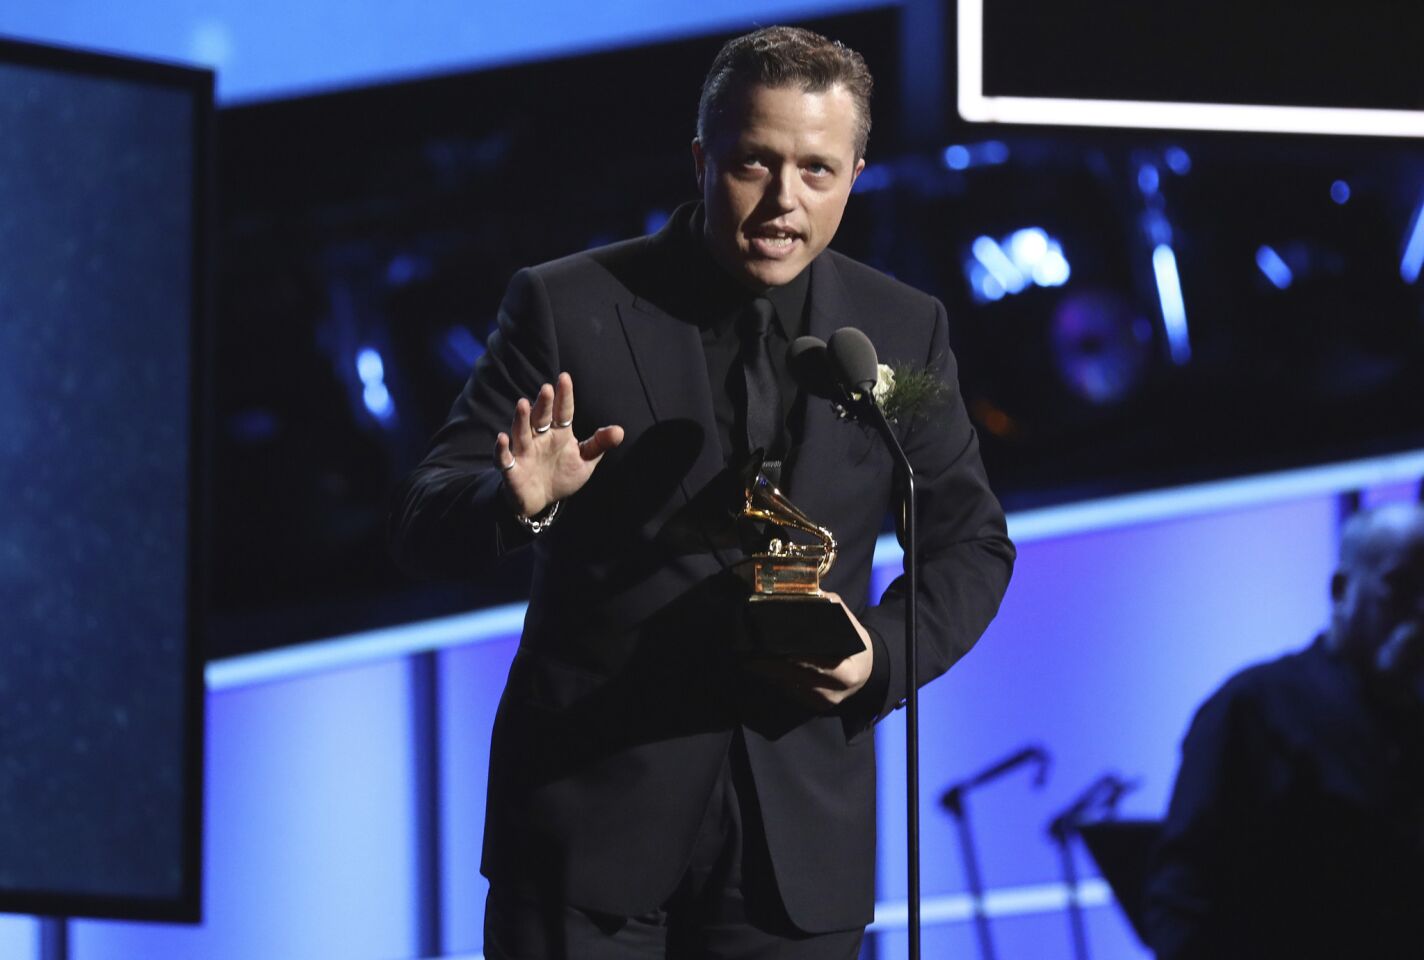 Jason Isbell accepts the American roots song award for "If We Were Vampires" at the pre-telecast show.